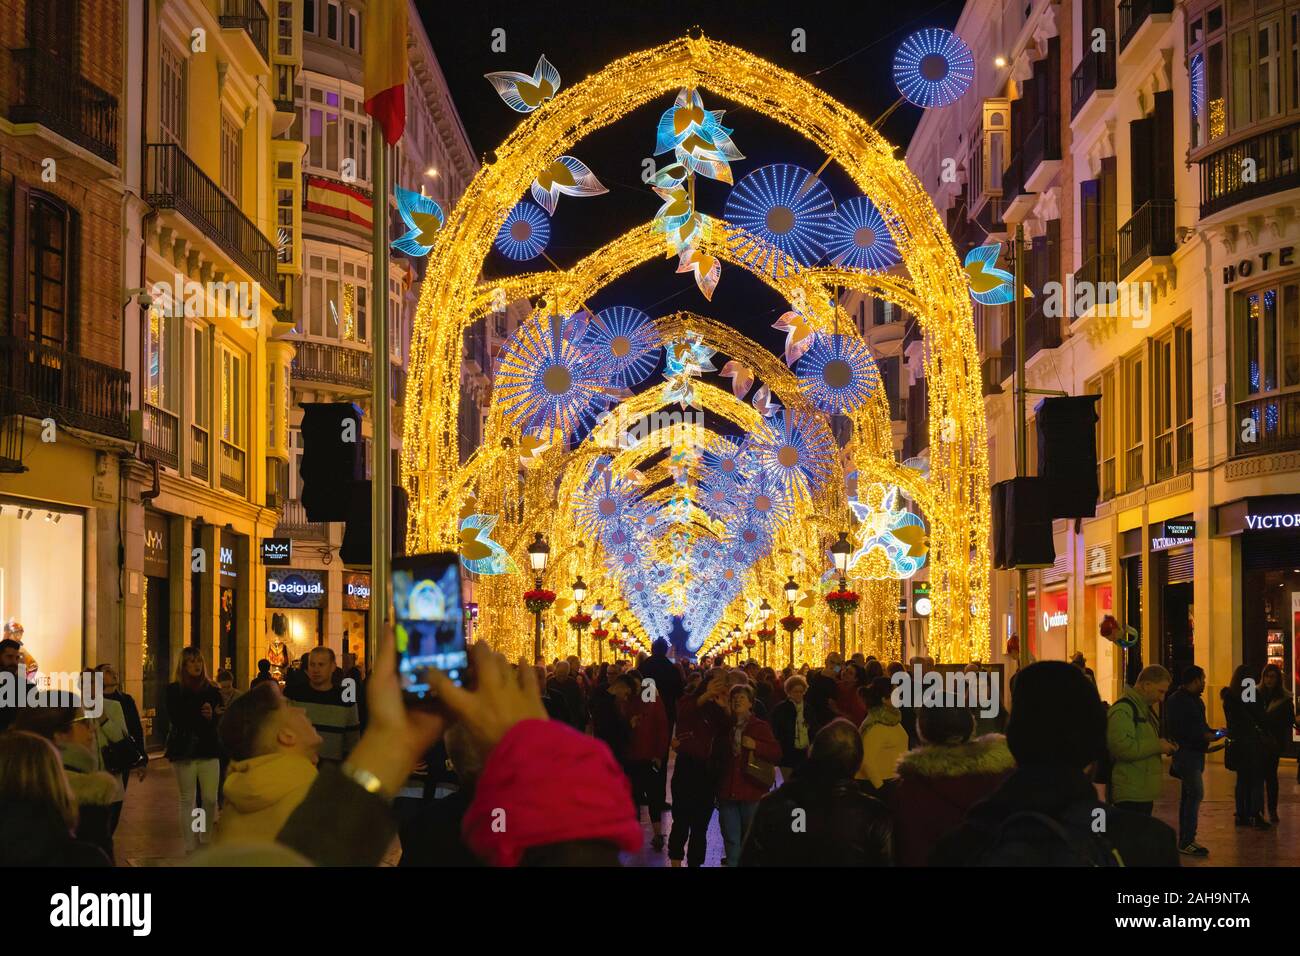 Crowds admiring Christmas street lights display in Calle Larios, the main street of  Malaga, Costa del Sol, Malaga Province, southern Spain. Stock Photo